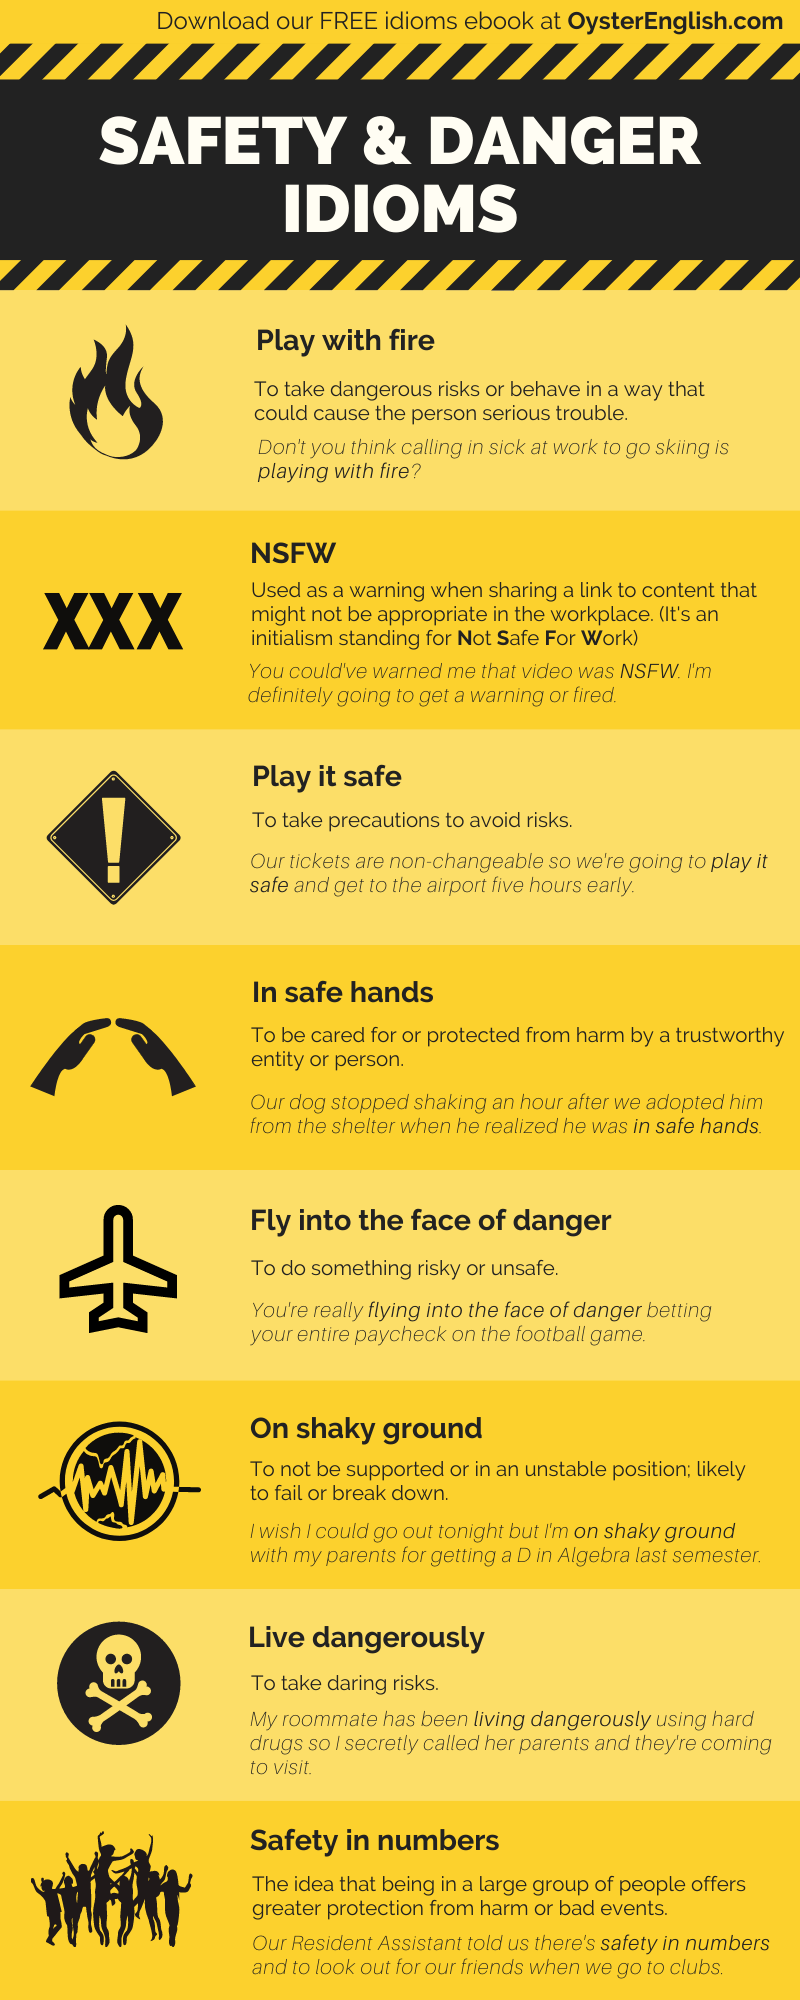 Idioms about Safety & Danger